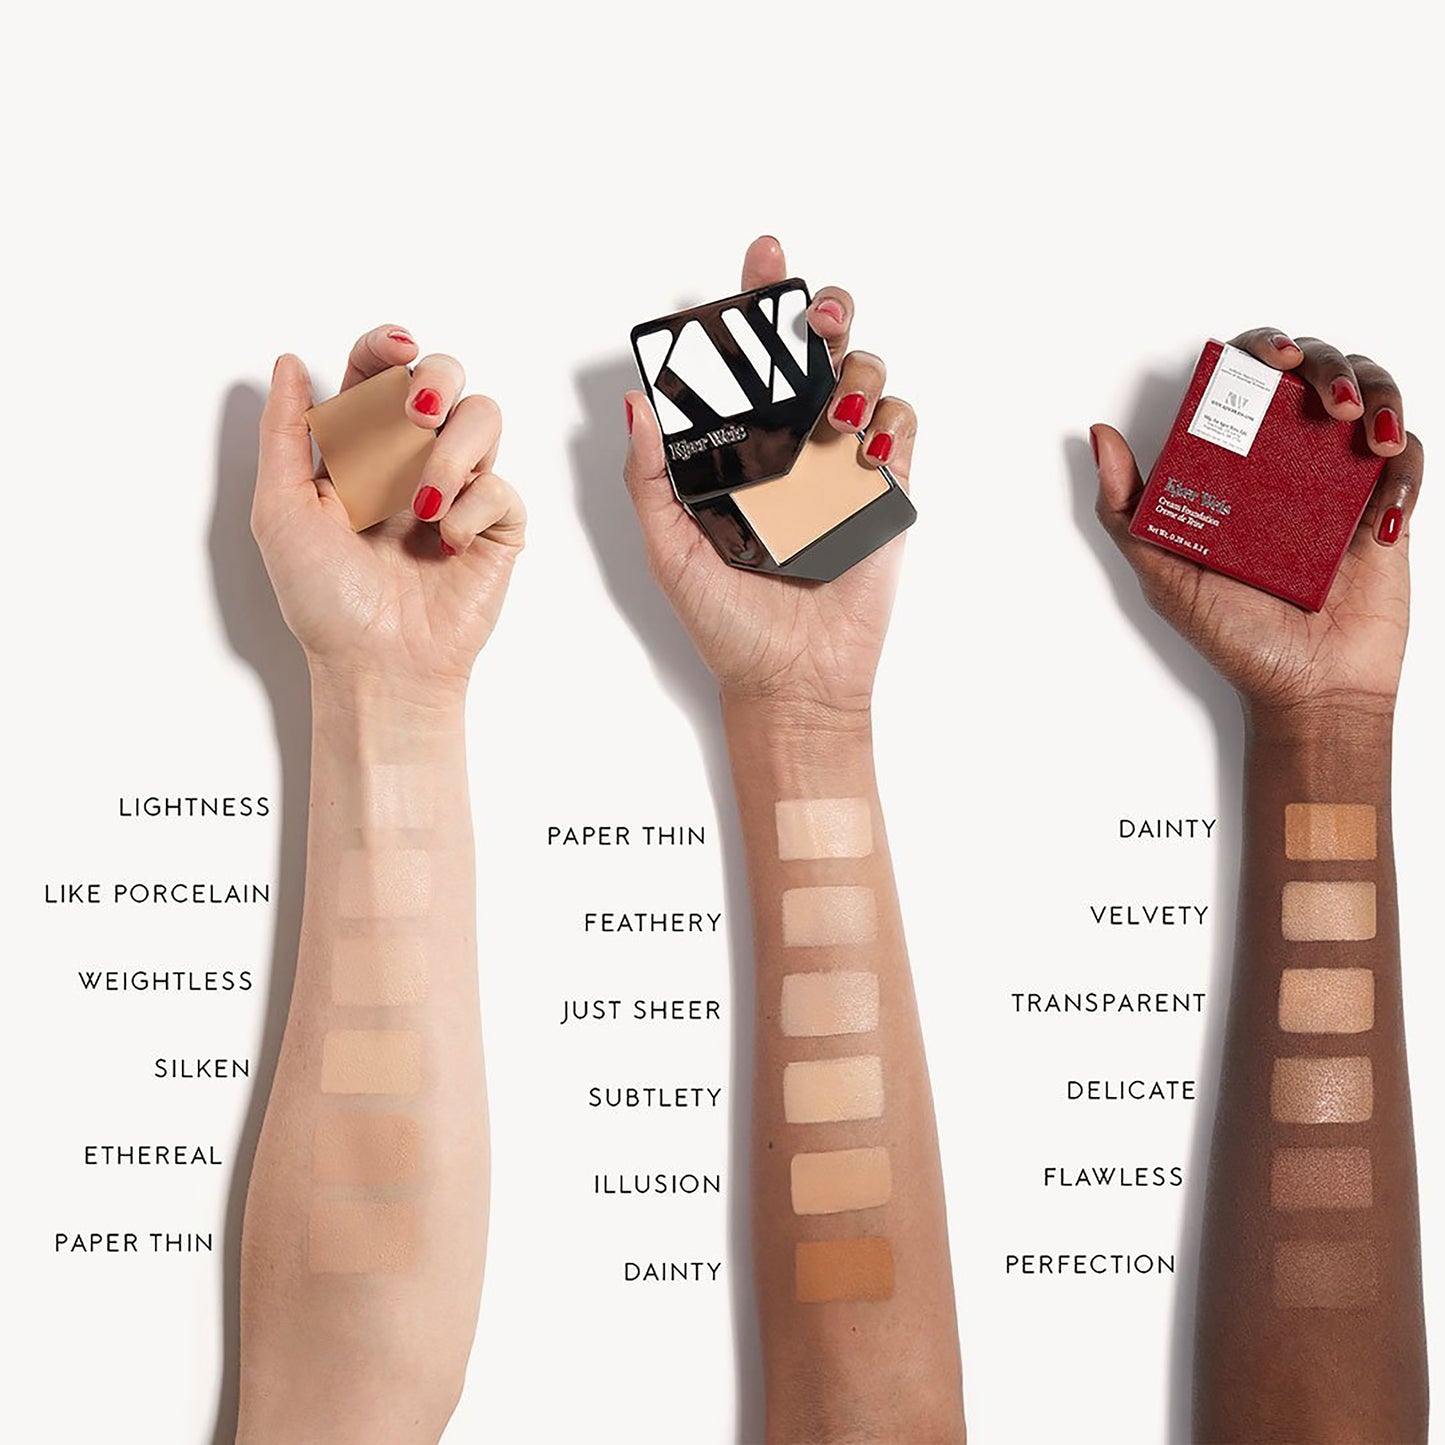 Three arms of three different skin tones all with a swatch of cream foundation from darkest to lightest shade. Lightness is the lightest shade on the lightest skin tone.  